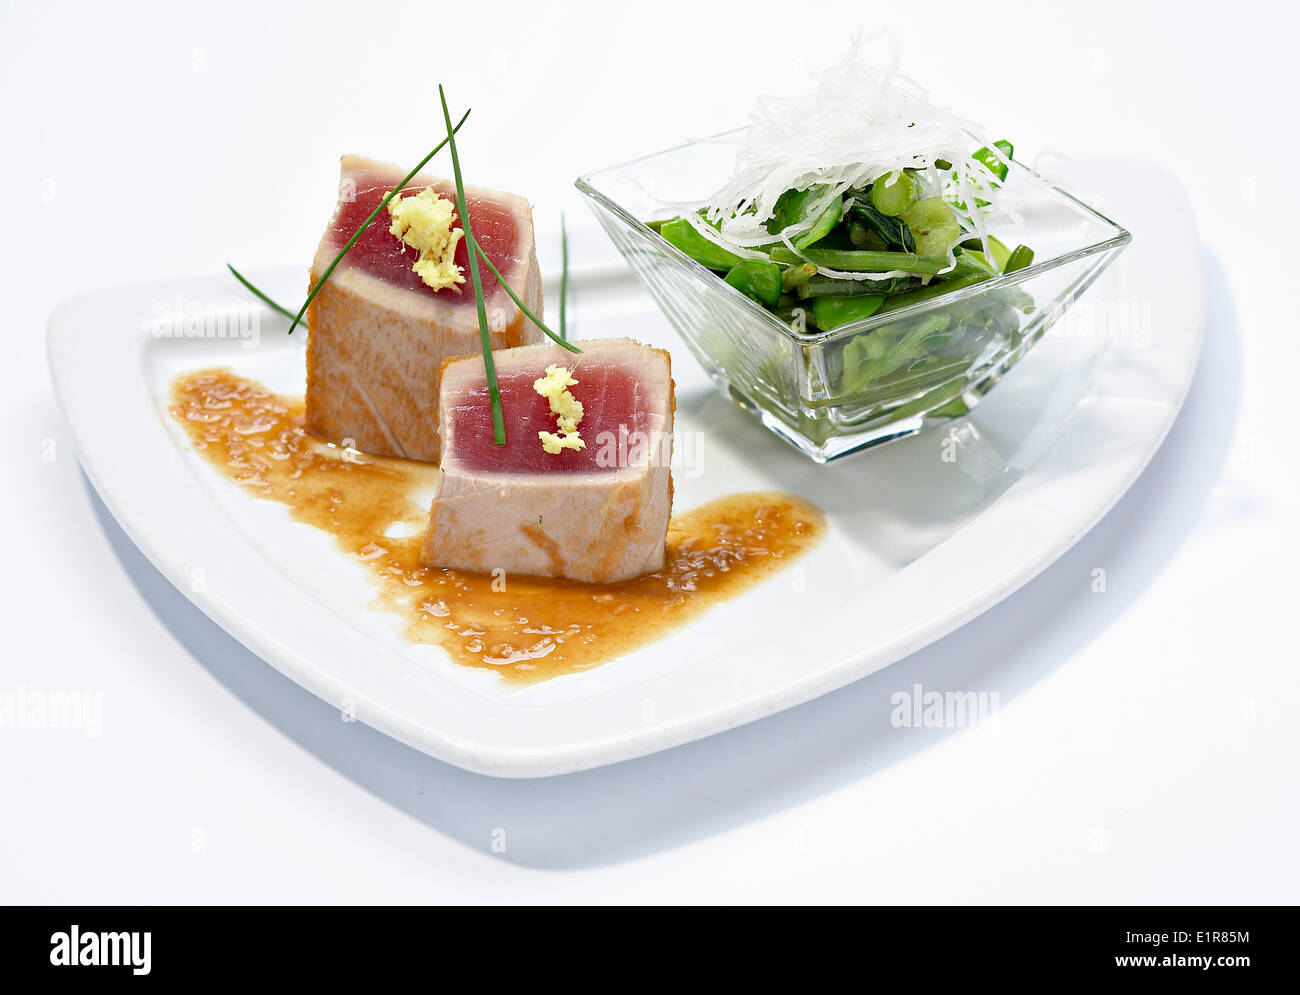 Half-cooked tuna,steamed green vegetables with daikon,ginger vinaigrette Stock Photo